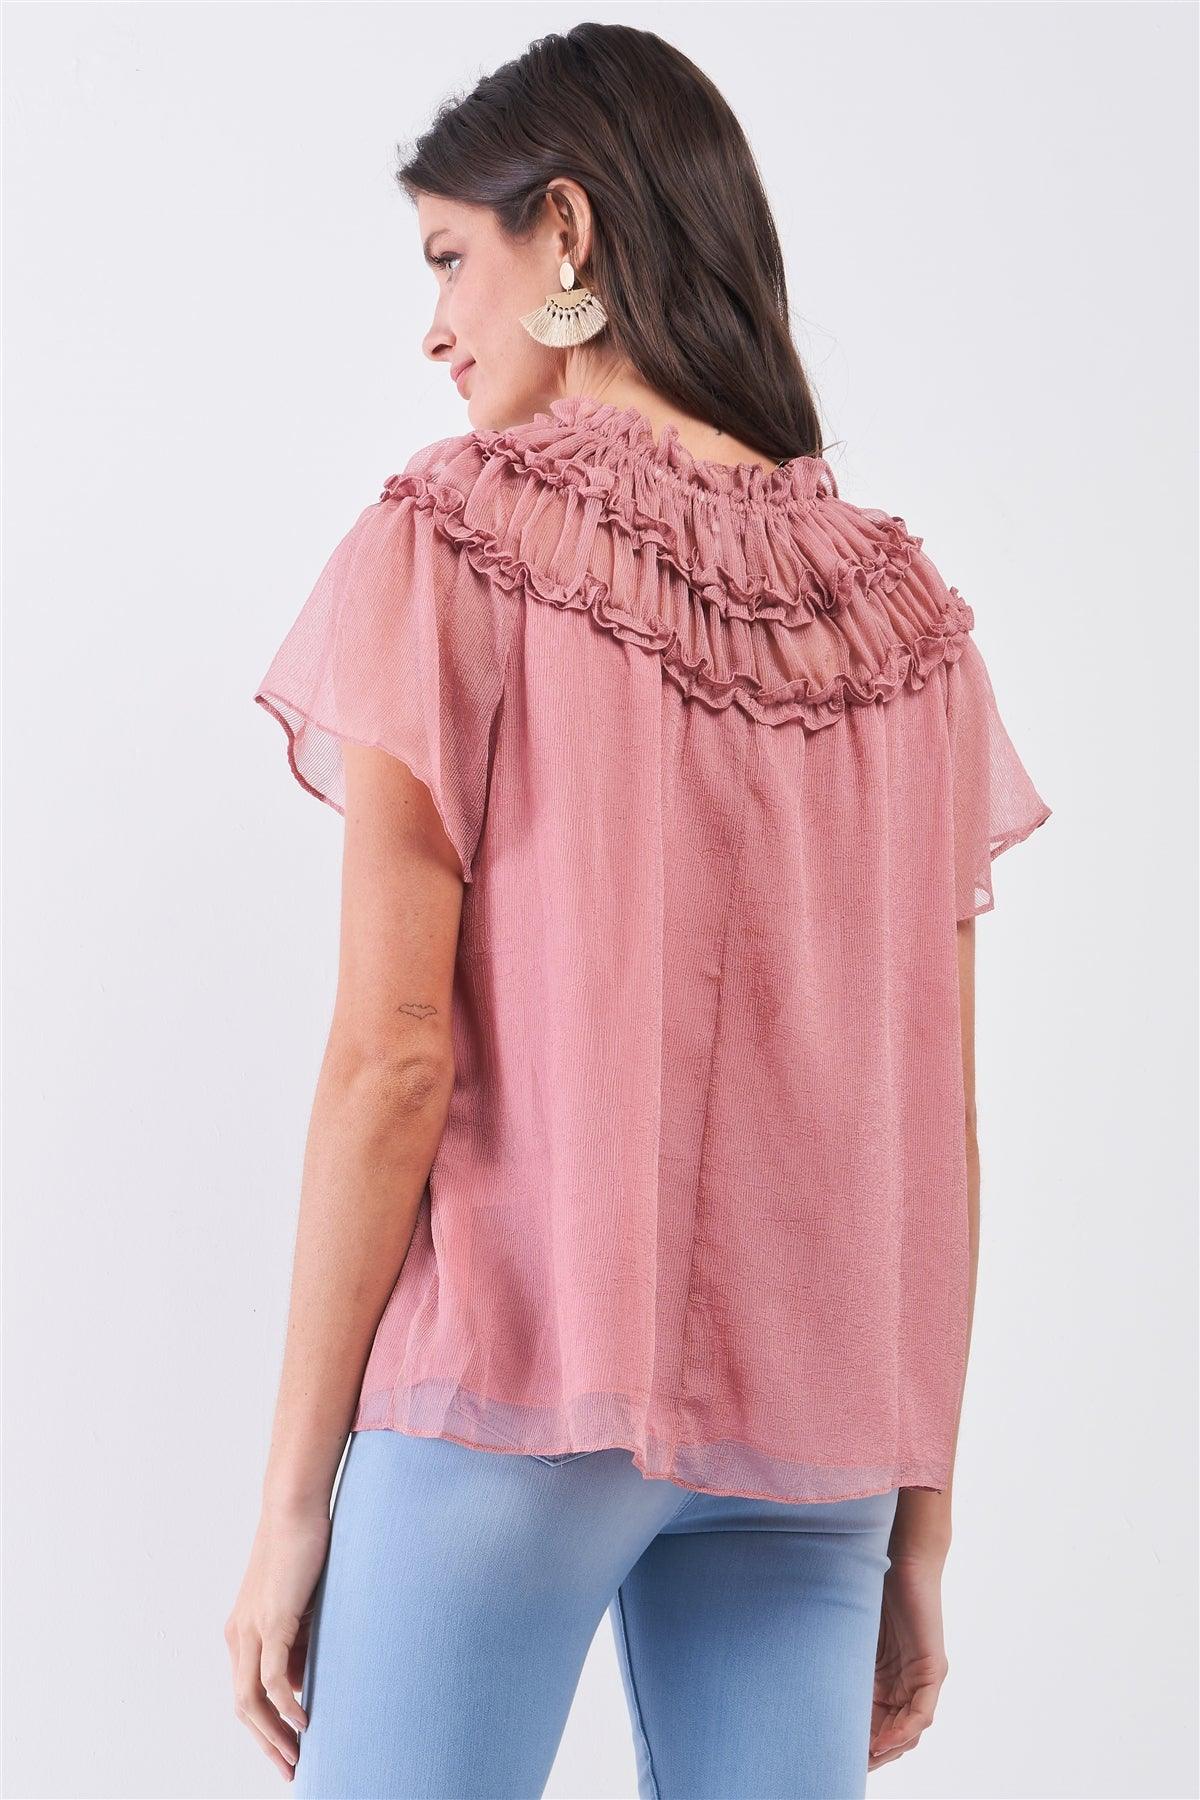 Dusty-Rose Short Angel Sleeve Ruffle Top With Double Self-Tie Drawstring Elasticated Round Neck Loose Fit Top /3-2-1